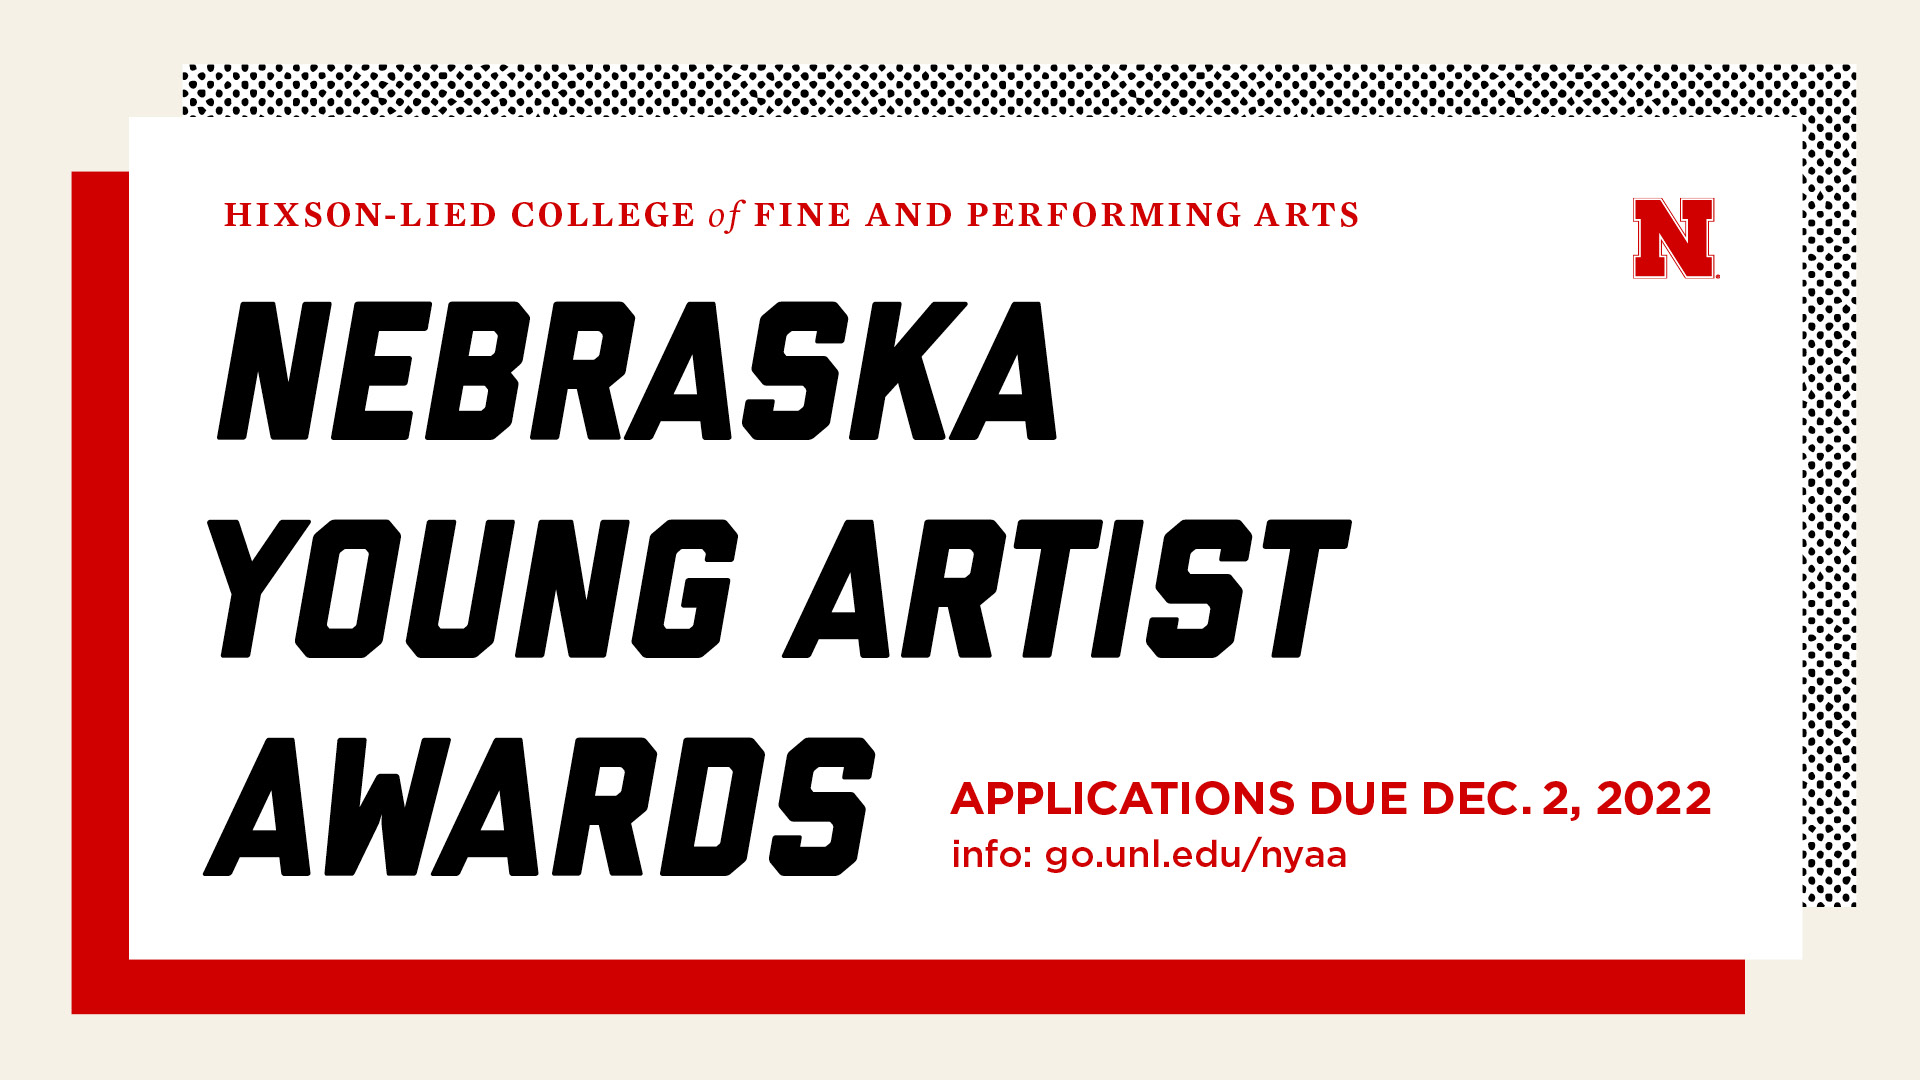 The Hixson-Lied College of Fine and Performing Arts is seeking applications for the Nebraska Young Artist Awards, which recognize 11th grade students in Nebraska who are talented in the arts. Applications are due Dec. 2.